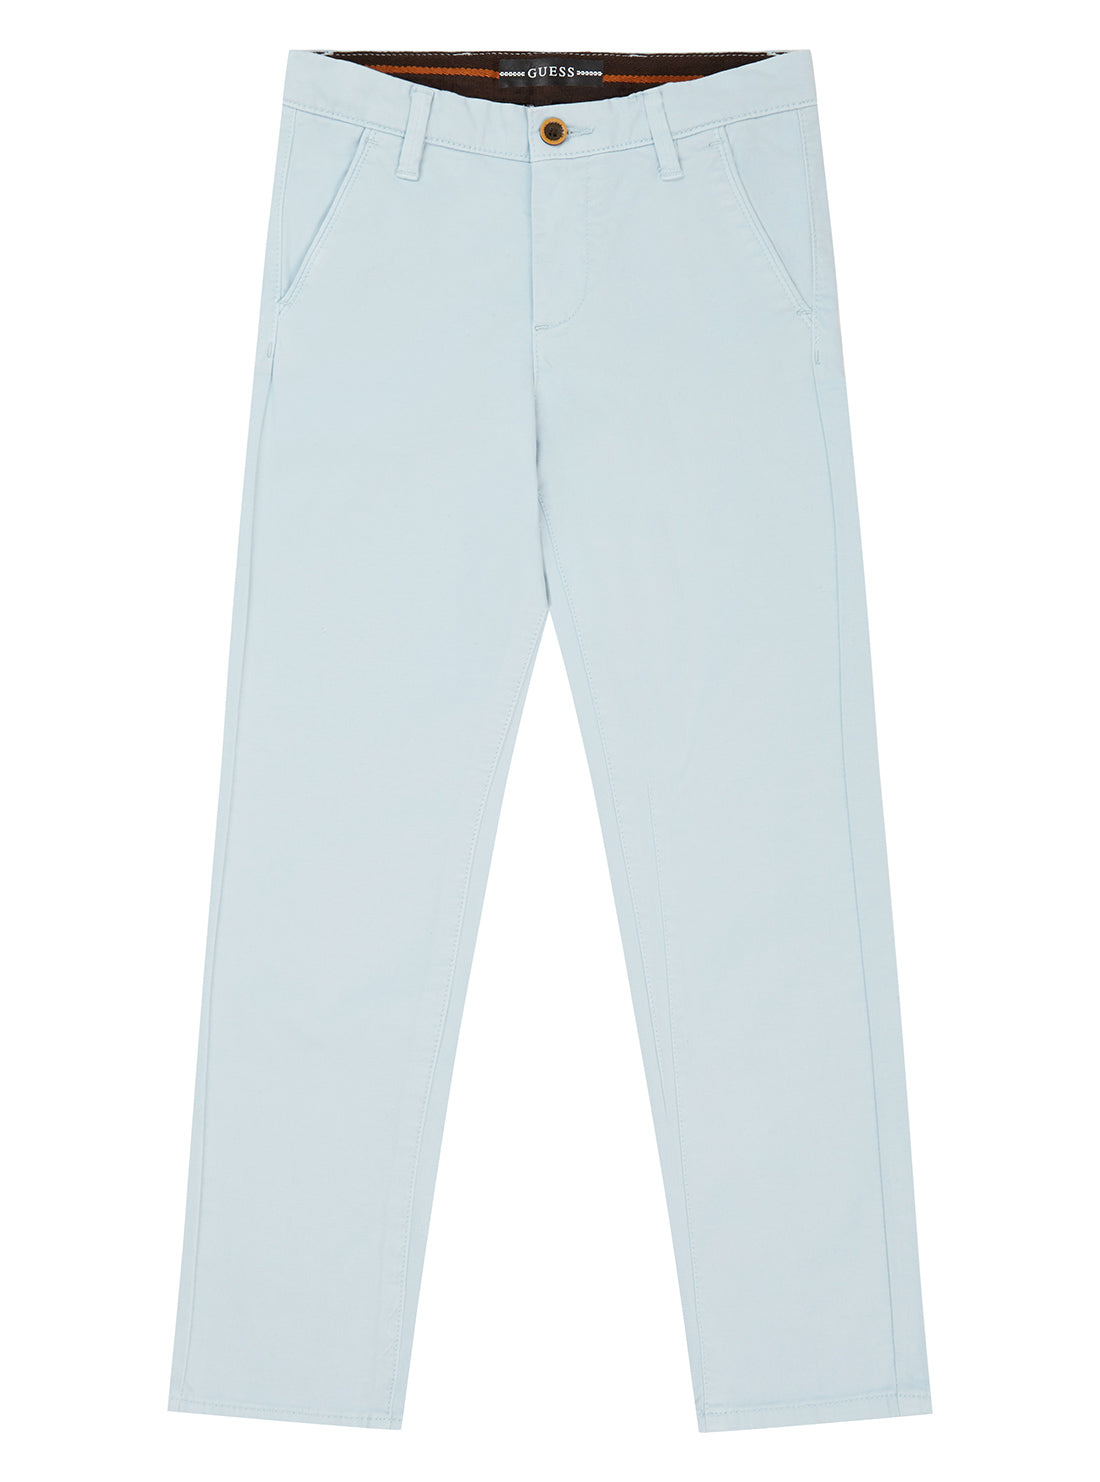 Frosted Blue Sateen Chino Pants (2-7)